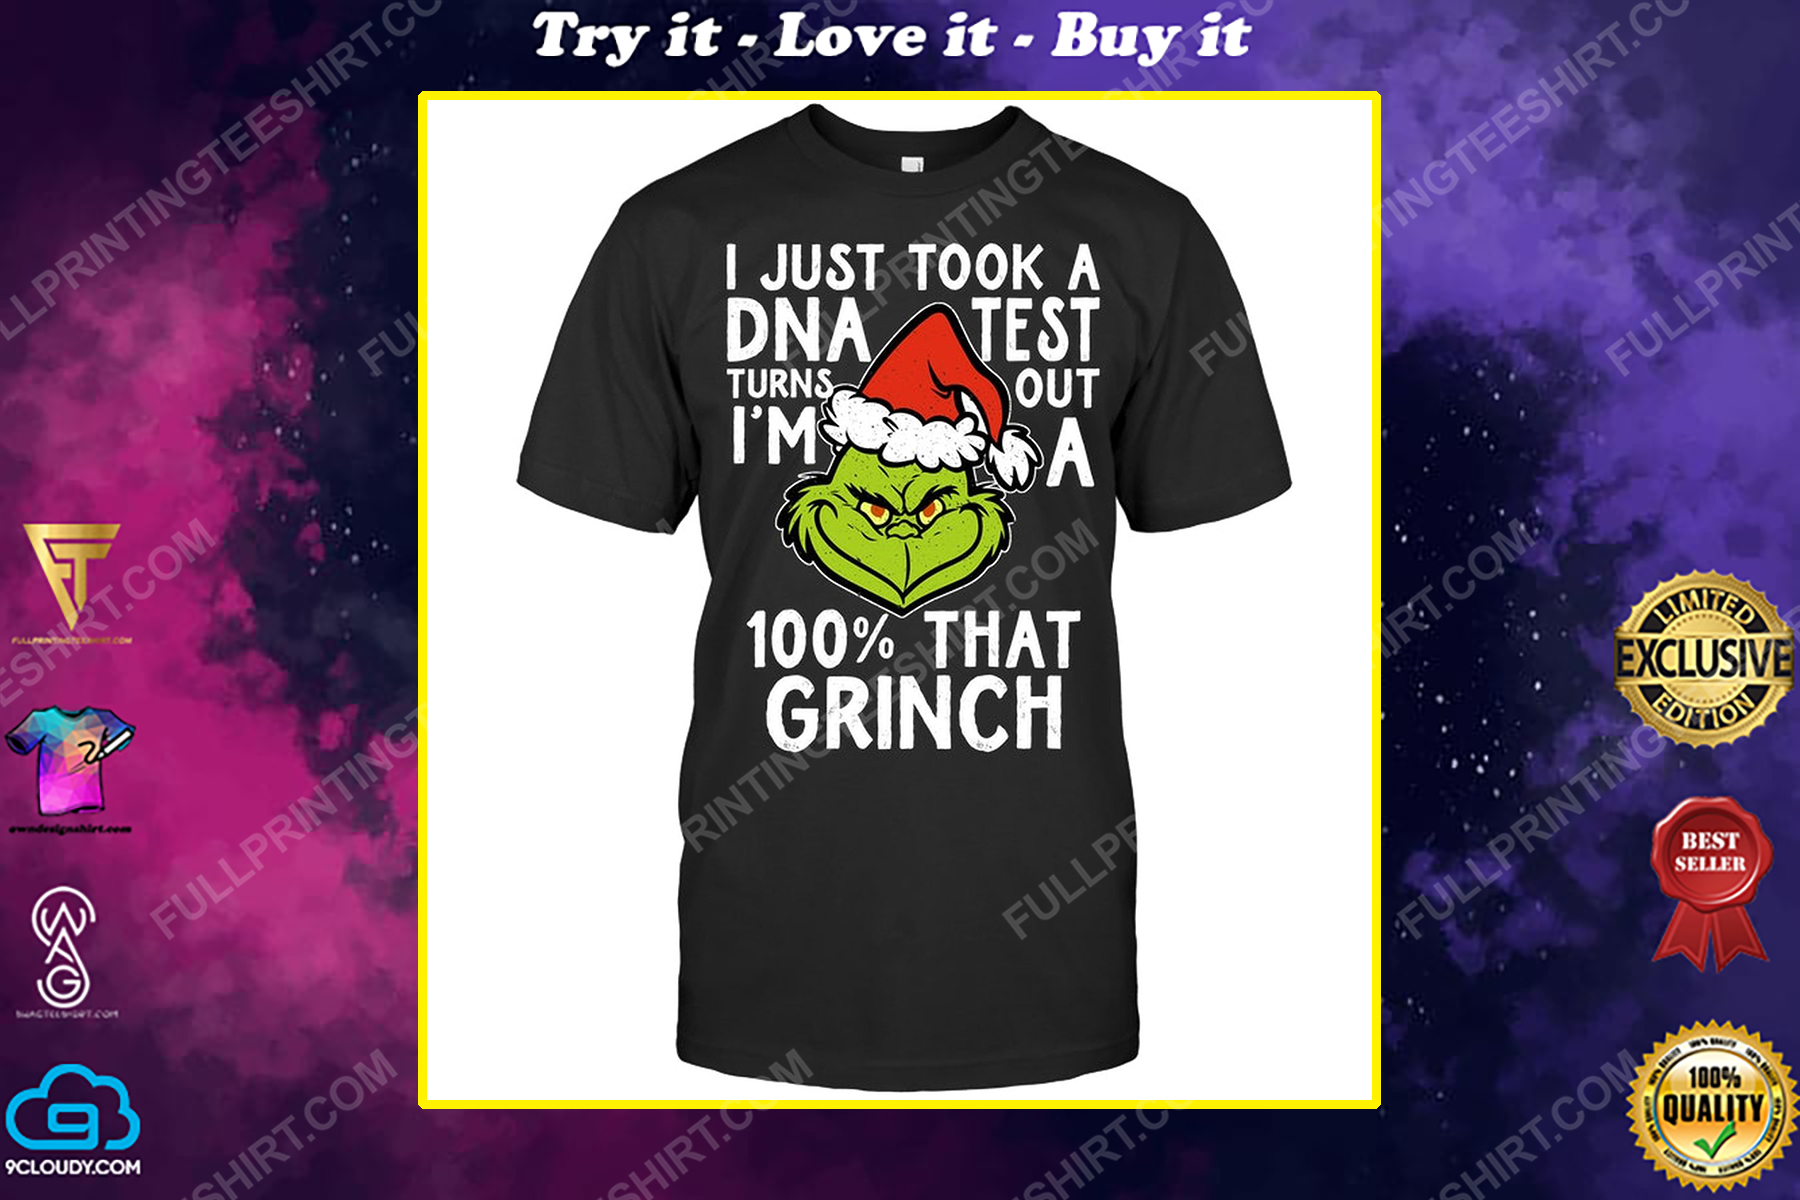 I just took a dna test turns out i'm 100 that grinch shirt